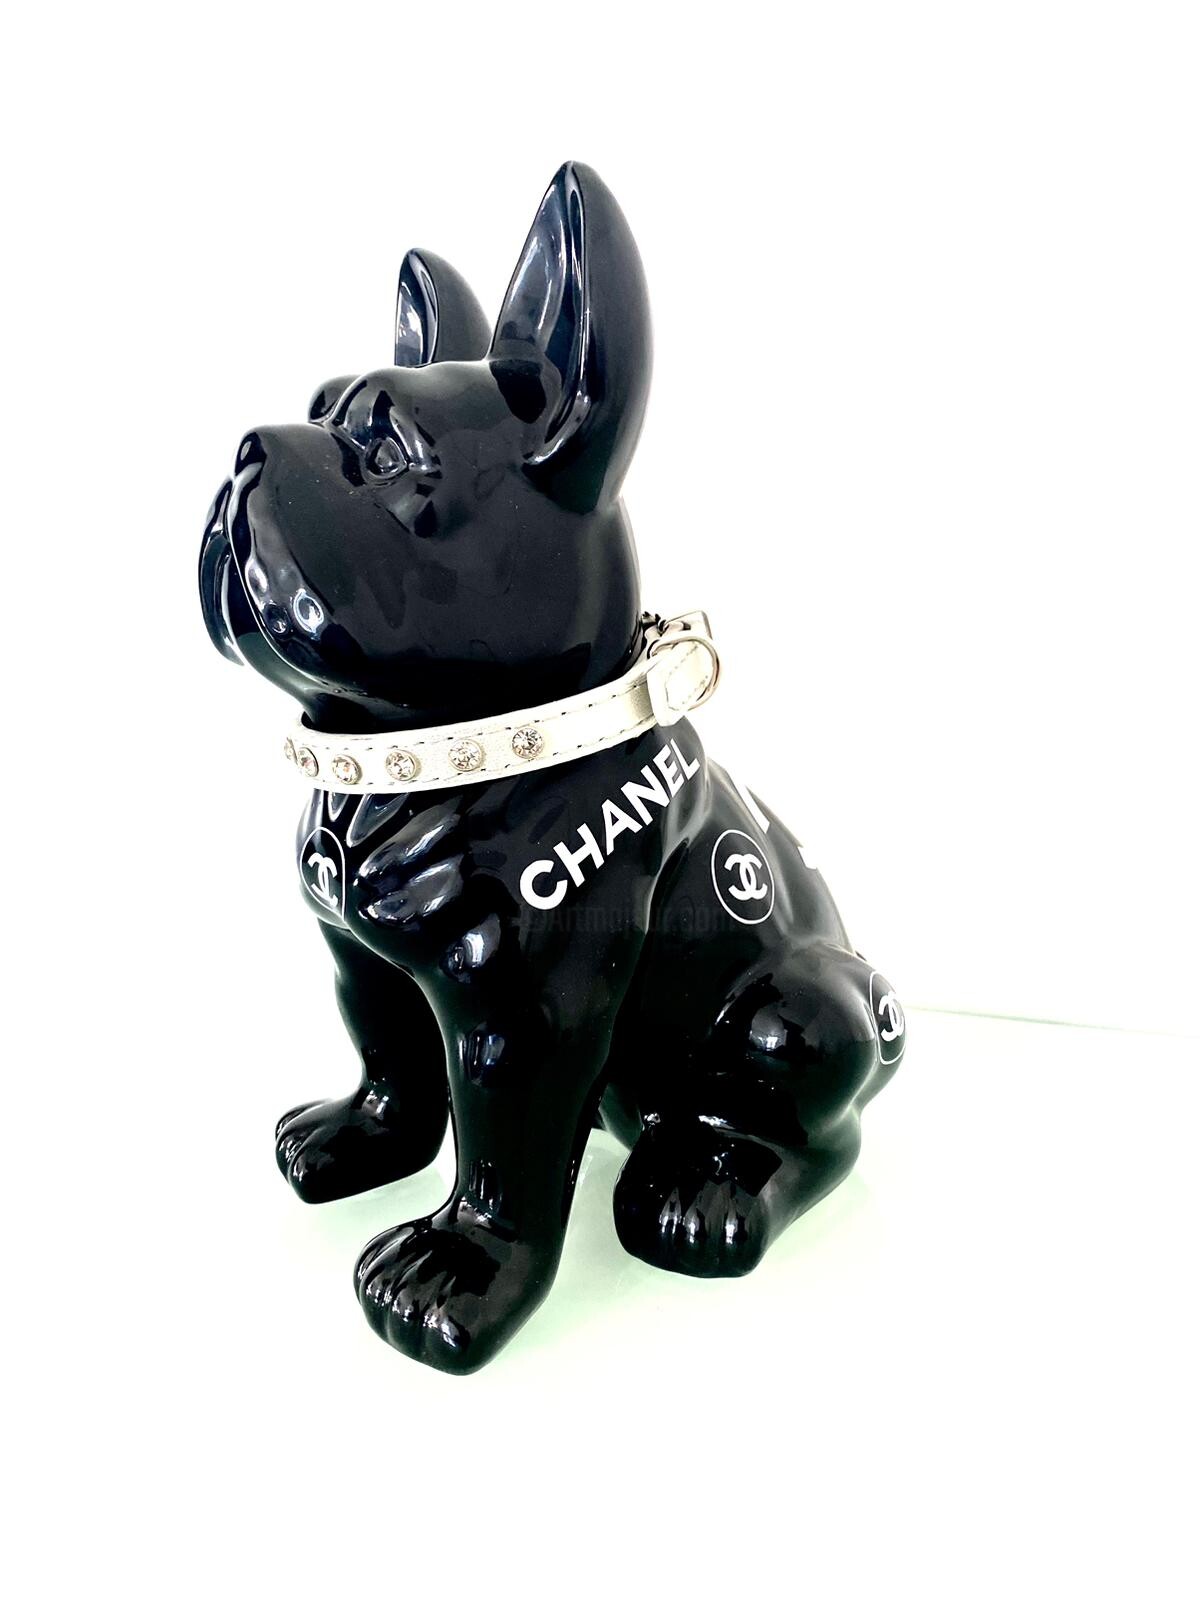 Chanel'dog, Sculpture by The Kri$$$